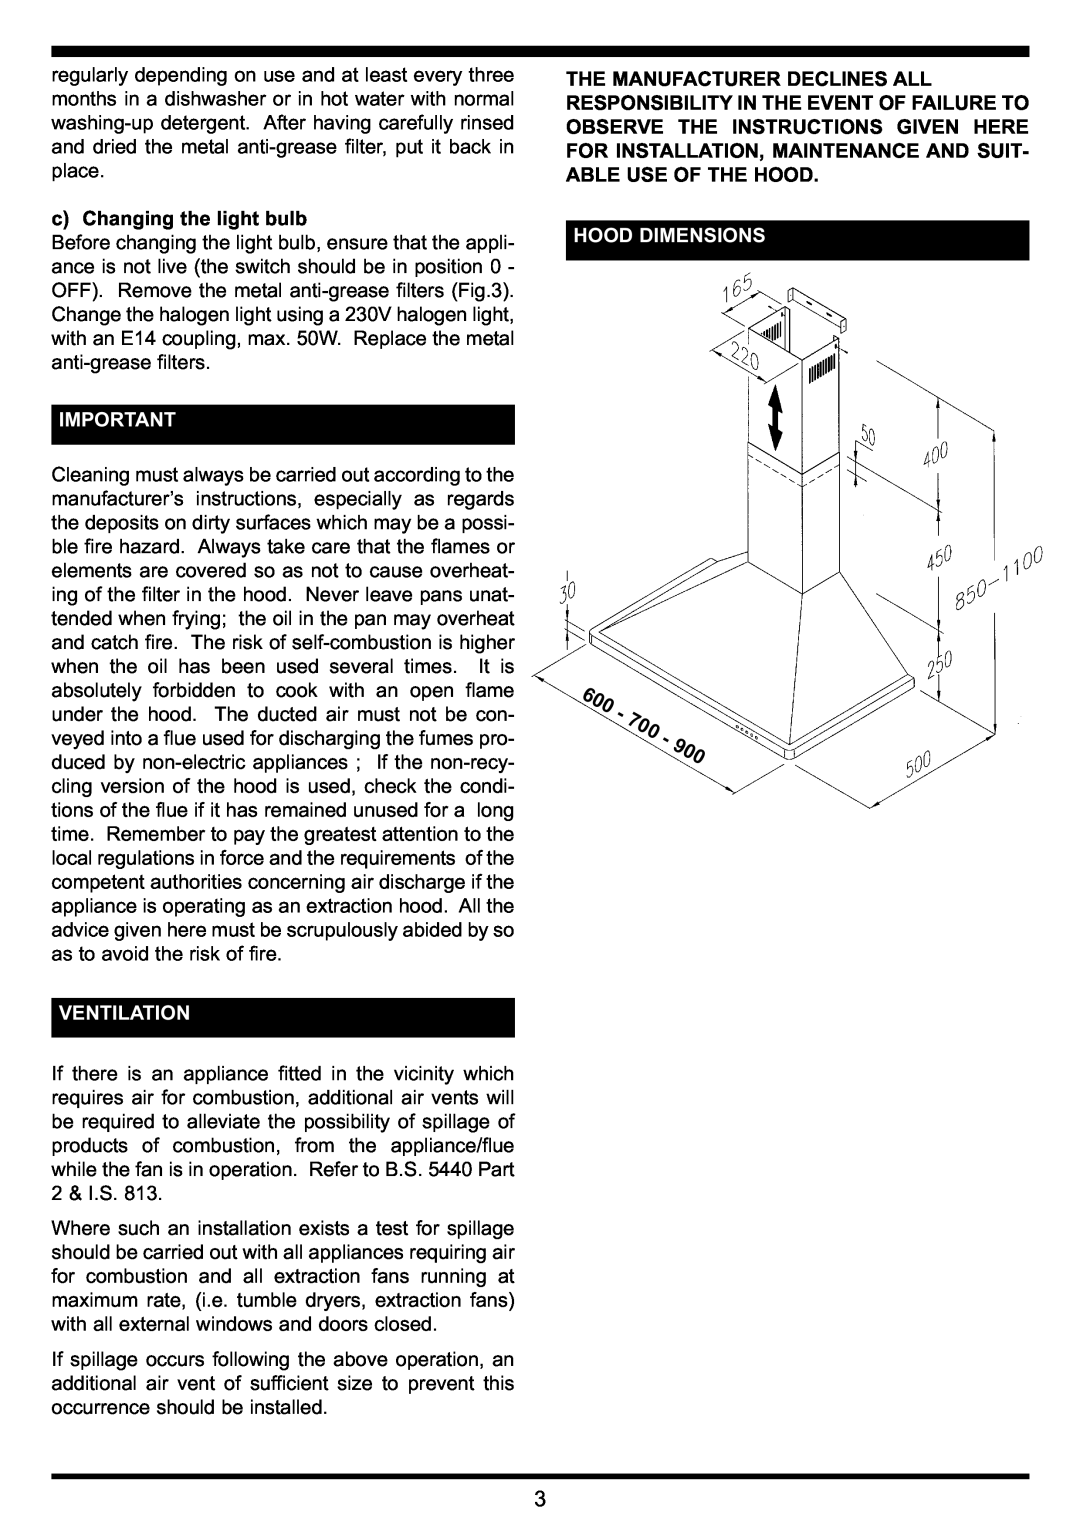 Waterford Precision Cycles Chimney Hood manual c Changing the light bulb, Ventilation, Hood Dimensions 